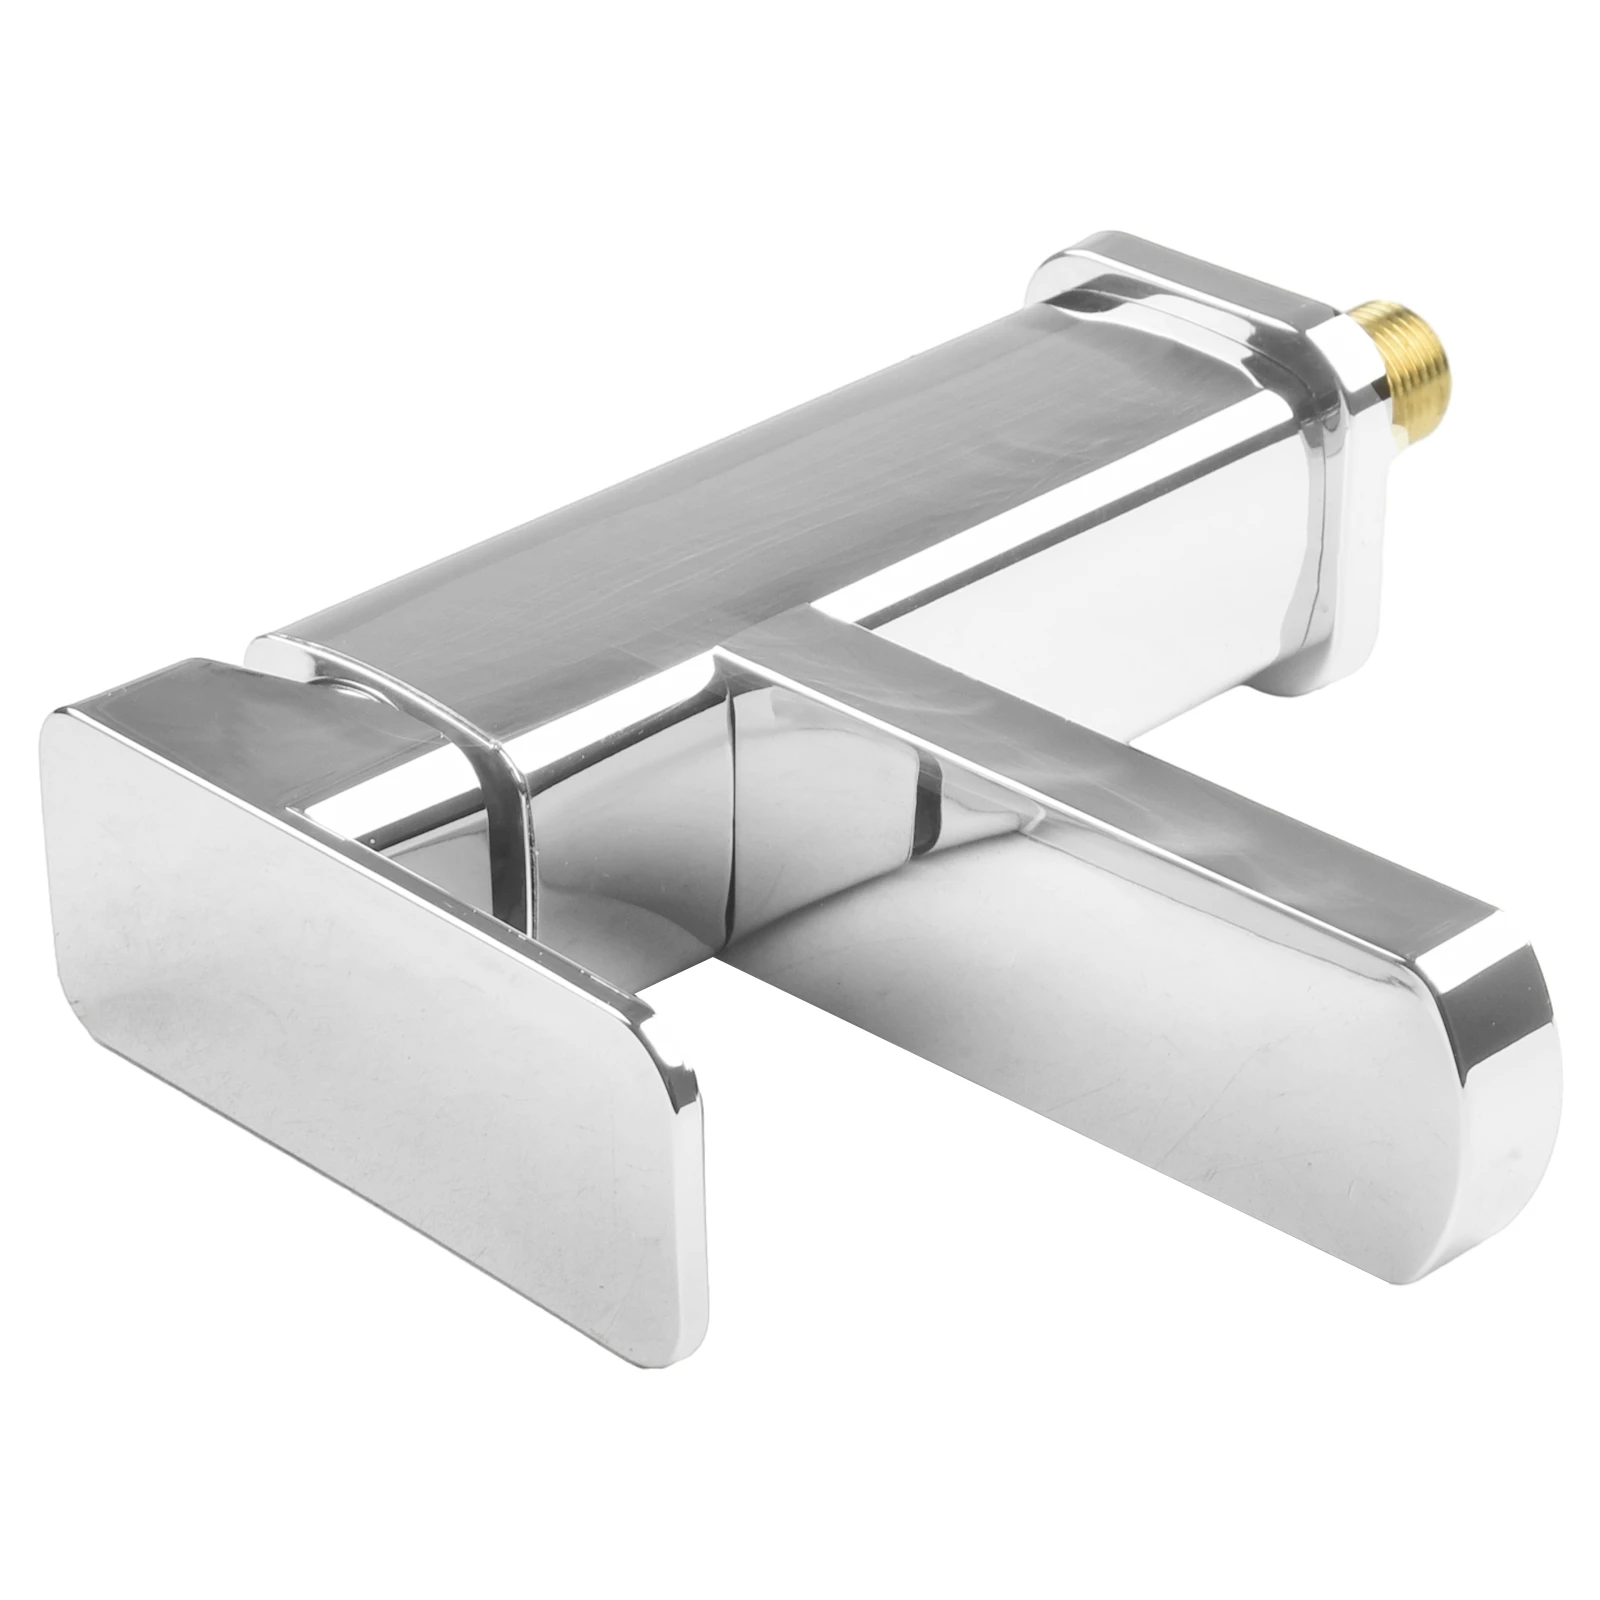 

Basin Faucet Bathroom Sink Faucet Stainless Steel Deck Mounted Single Cold Water Basin Taps Silver Square Lavatory Sink Tap